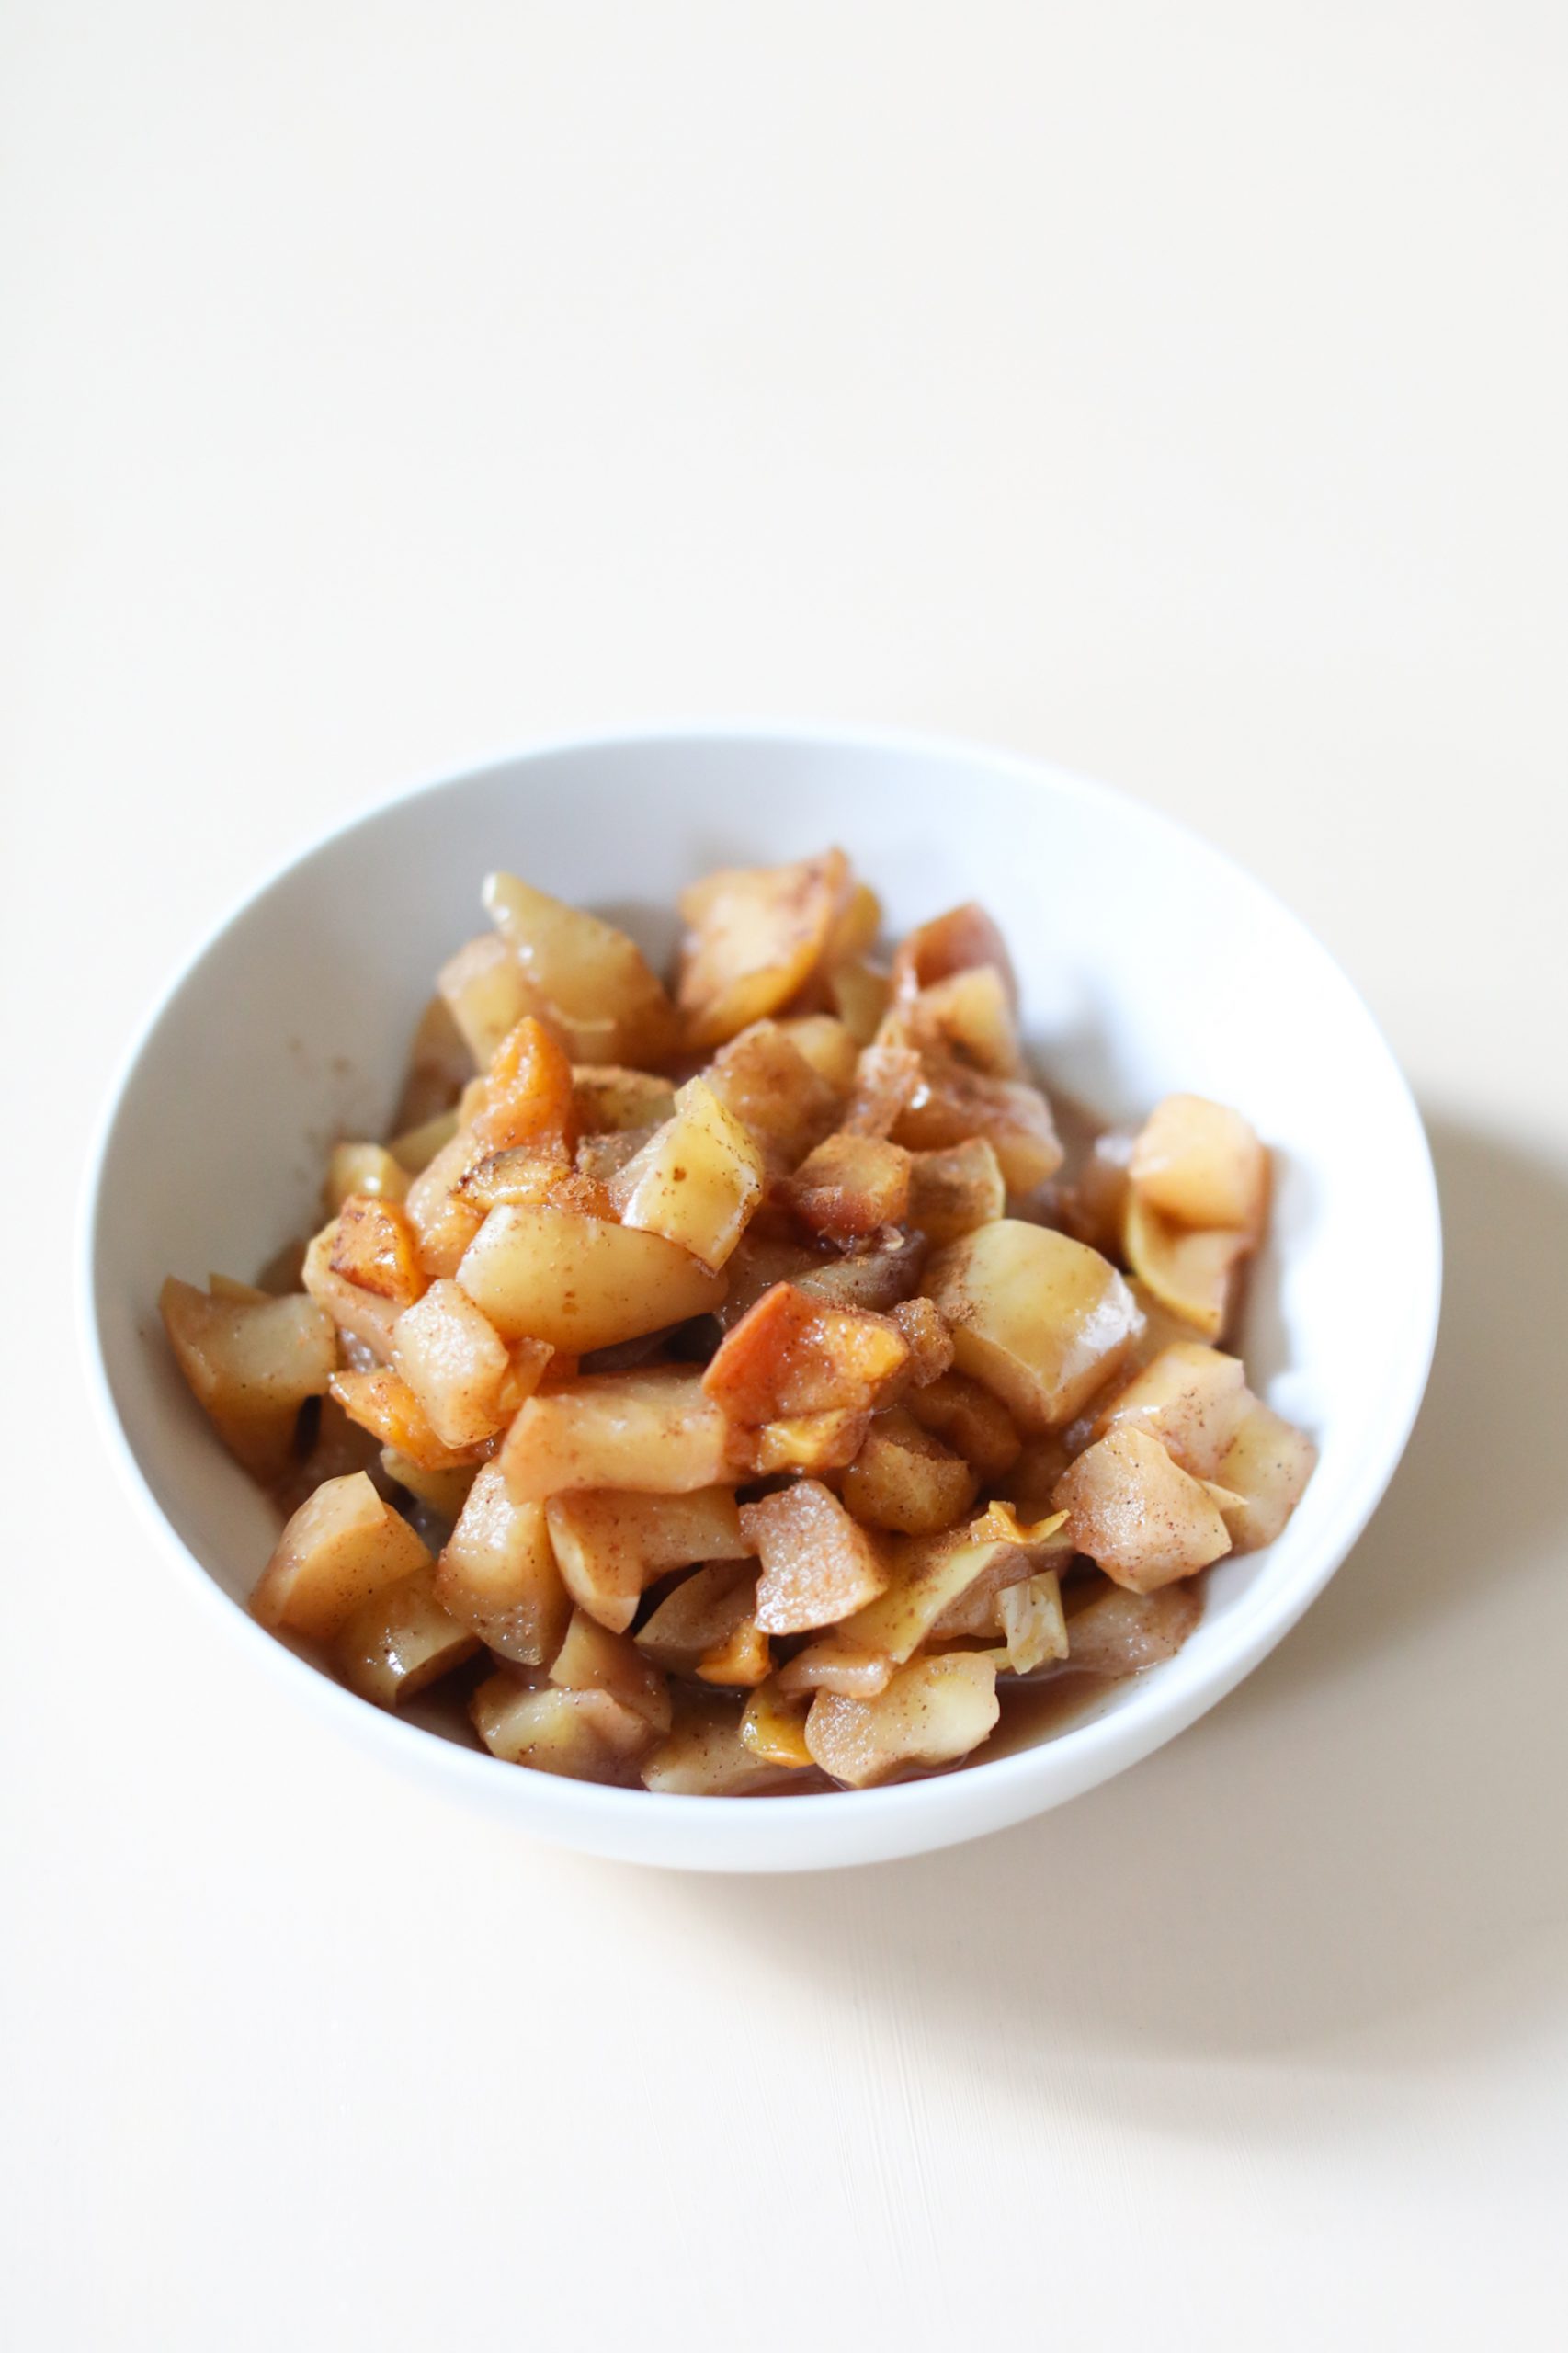 Stewed Apples with Warming Spices